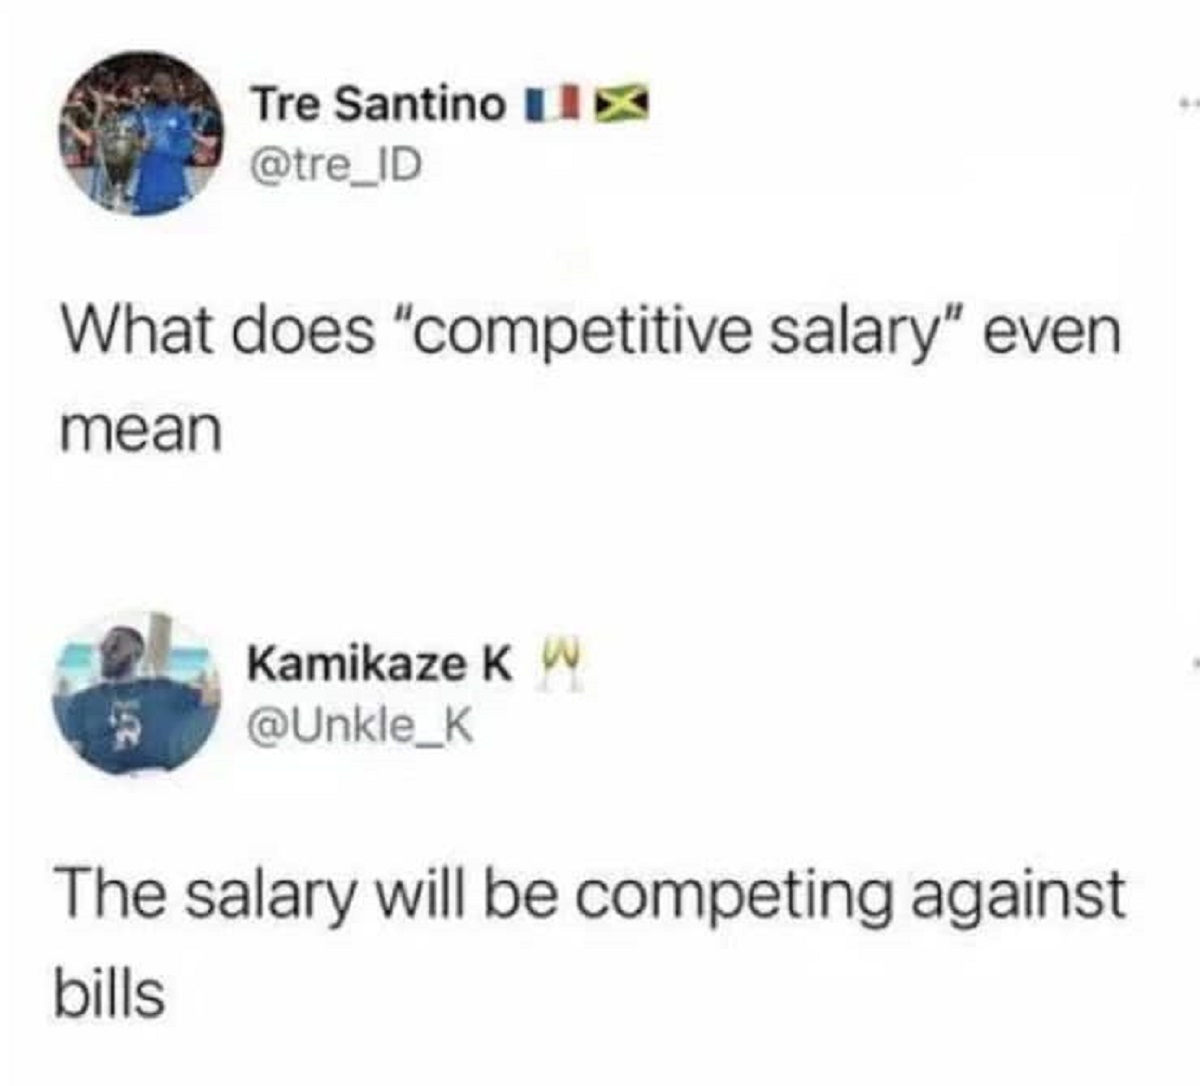 screenshot - Tre Santino X What does "competitive salary" even mean Kamikaze Kw The salary will be competing against bills